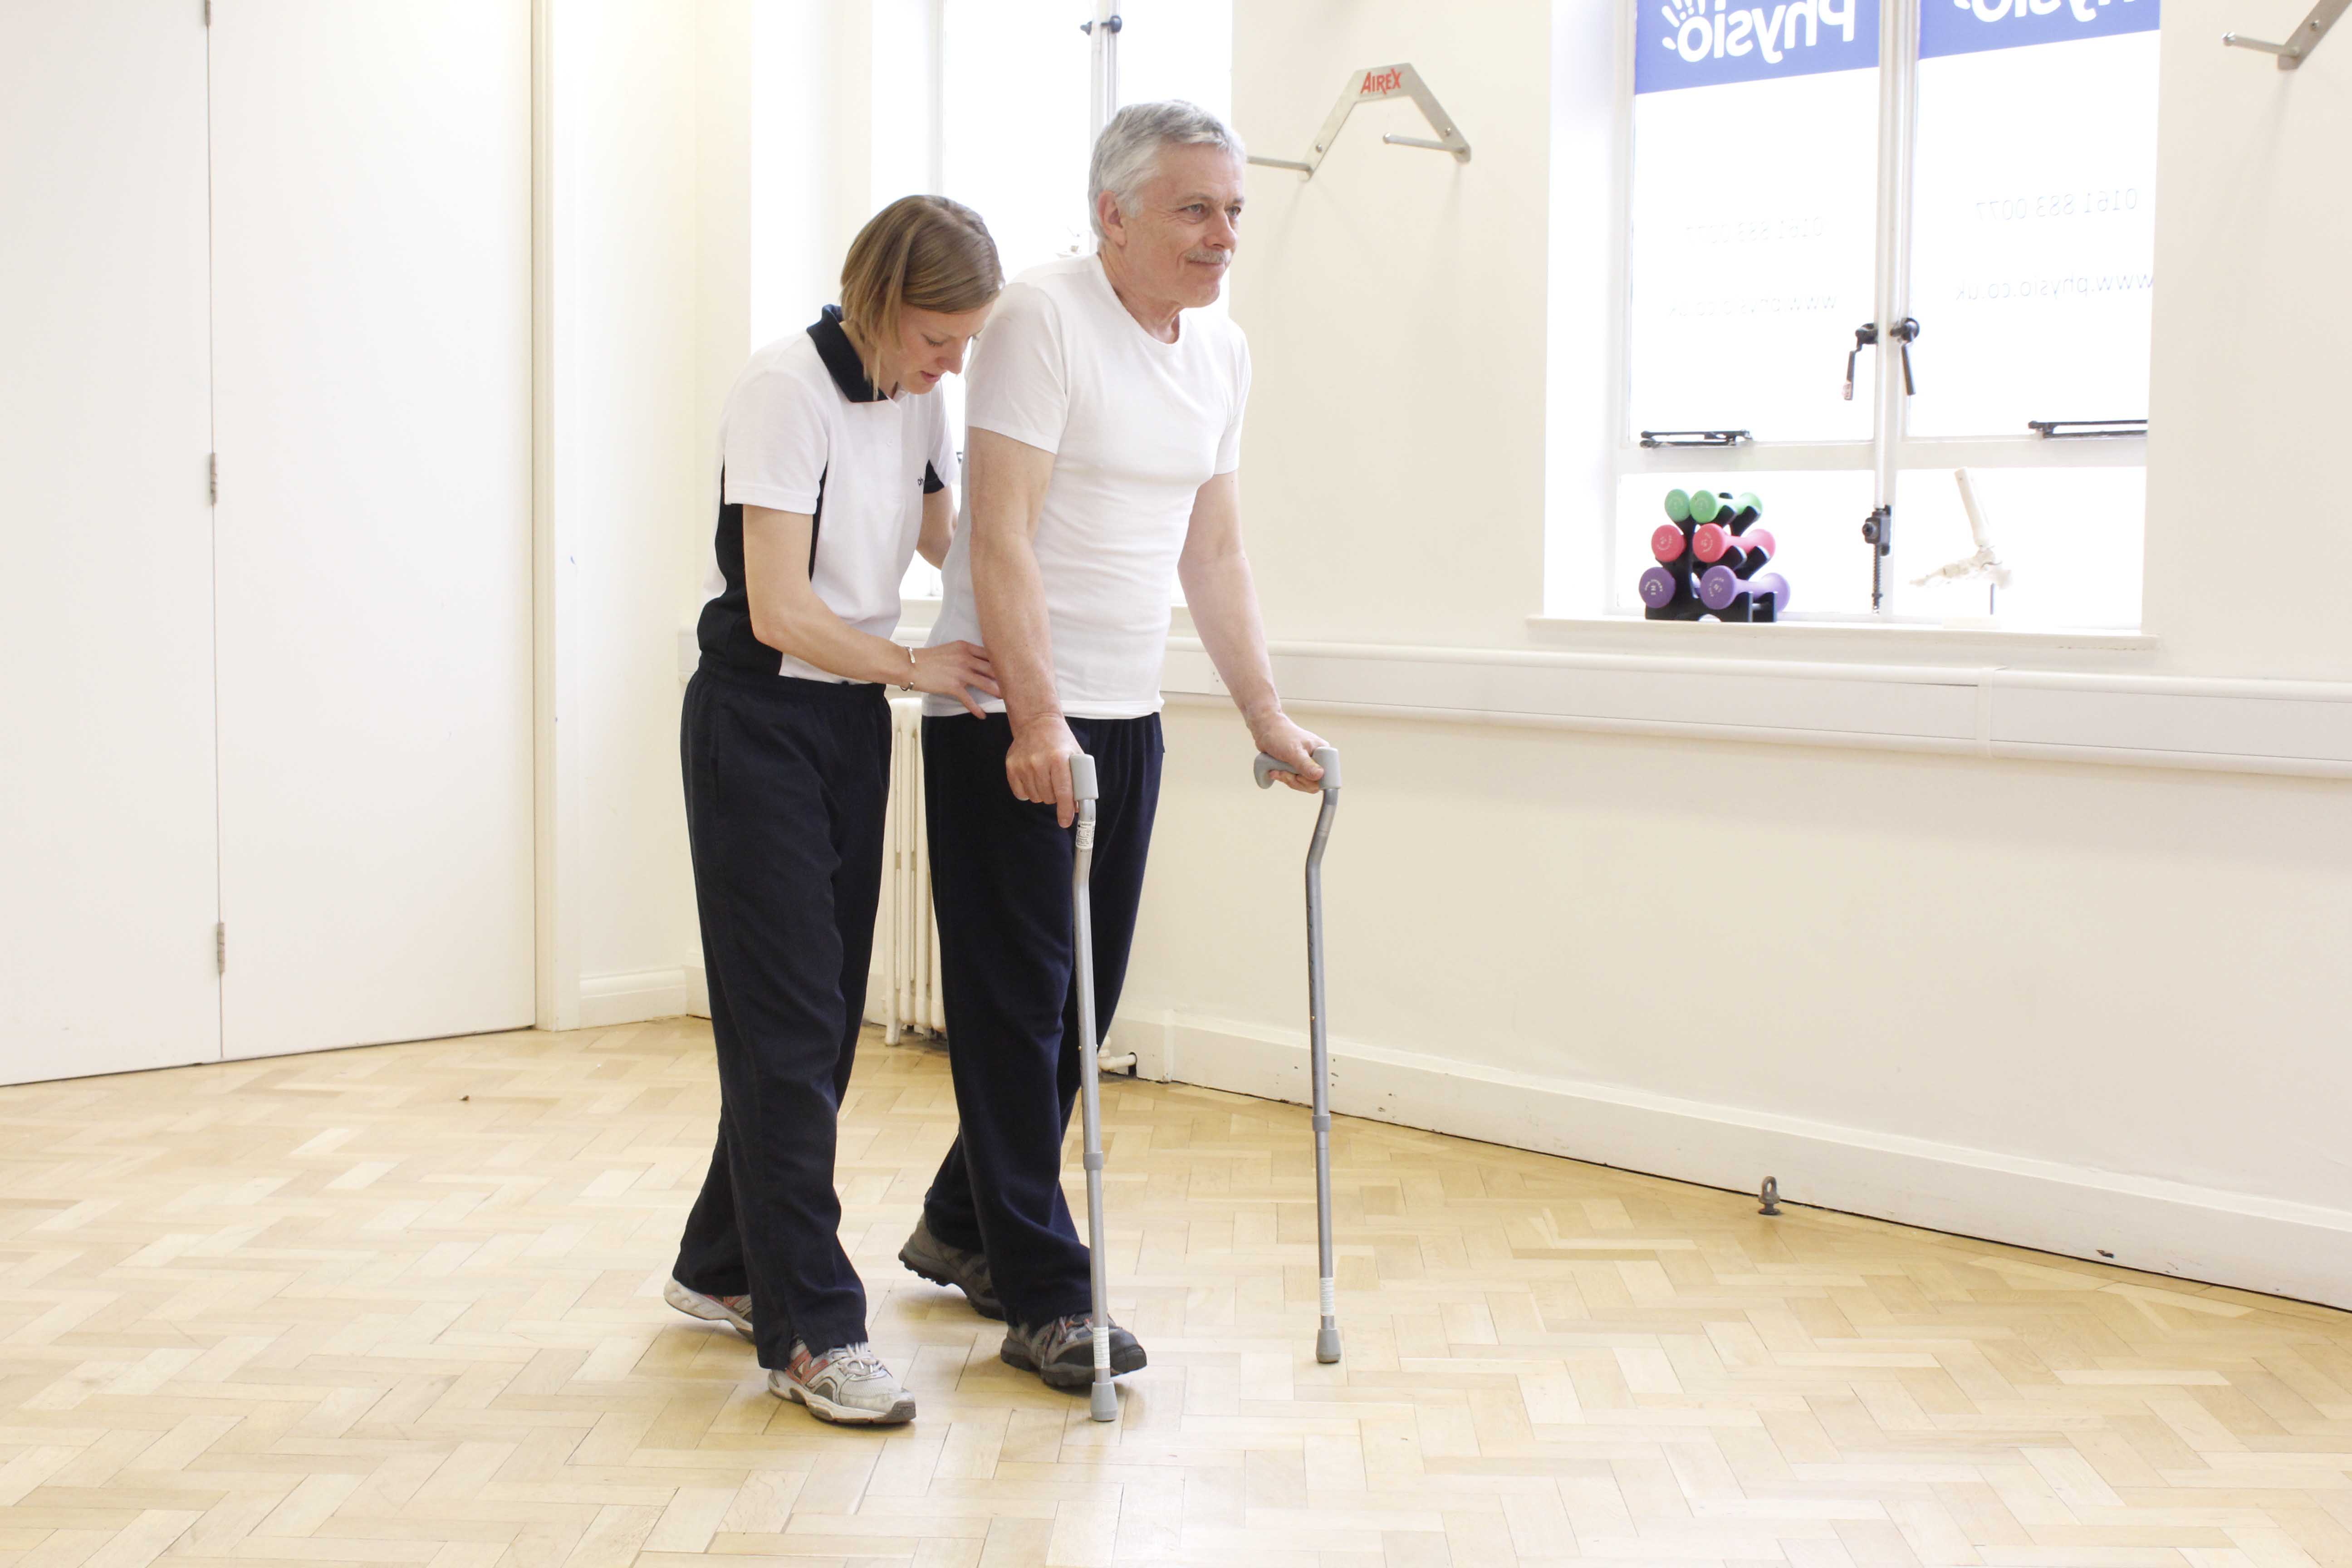 Gait re-education exercises to help address biomechanical abnormalities